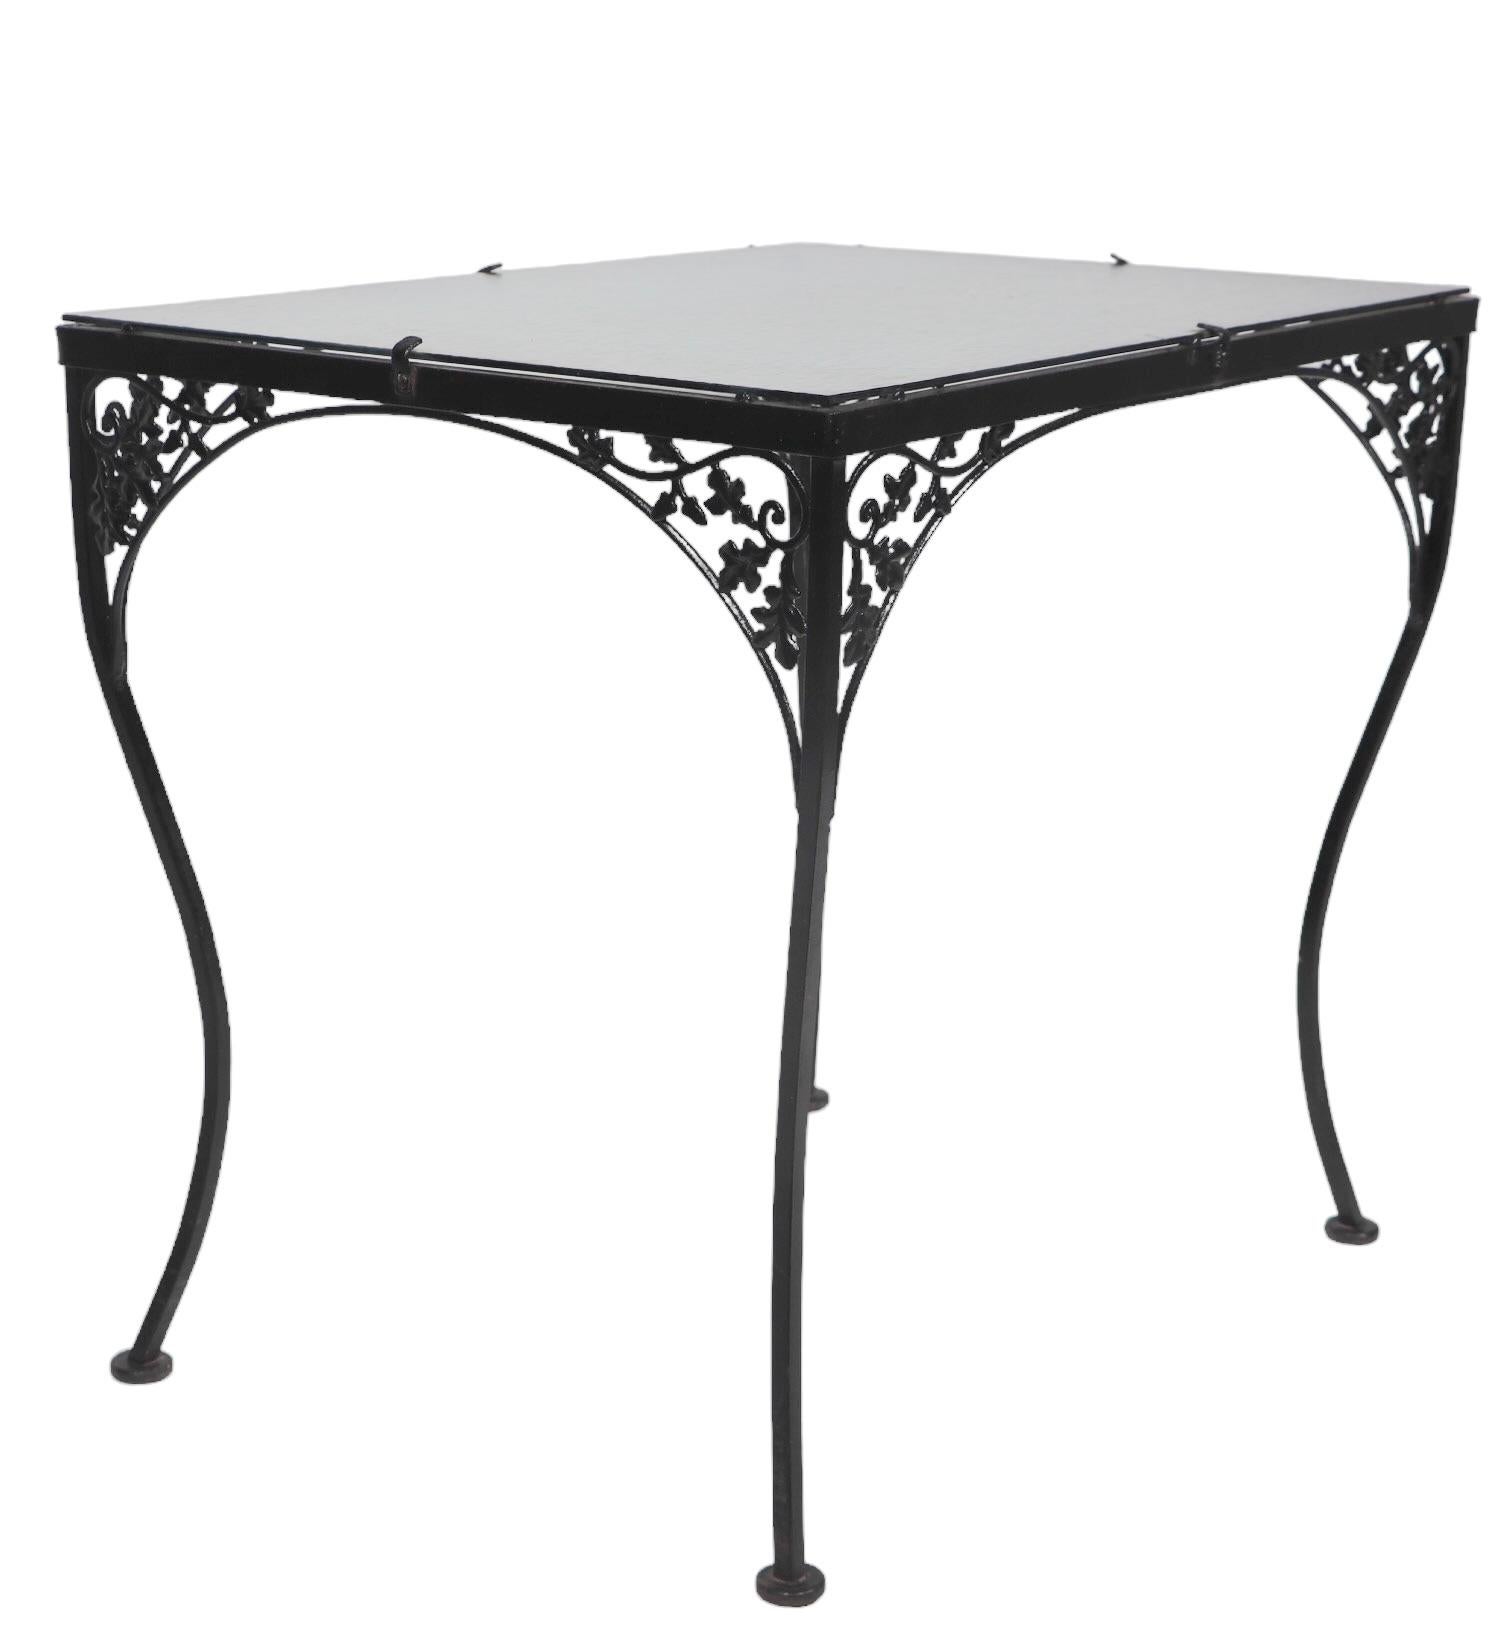 20th Century Ornate Wrought Iron and Glass Garden Patio Poolside Dining Table att. to Woodard For Sale